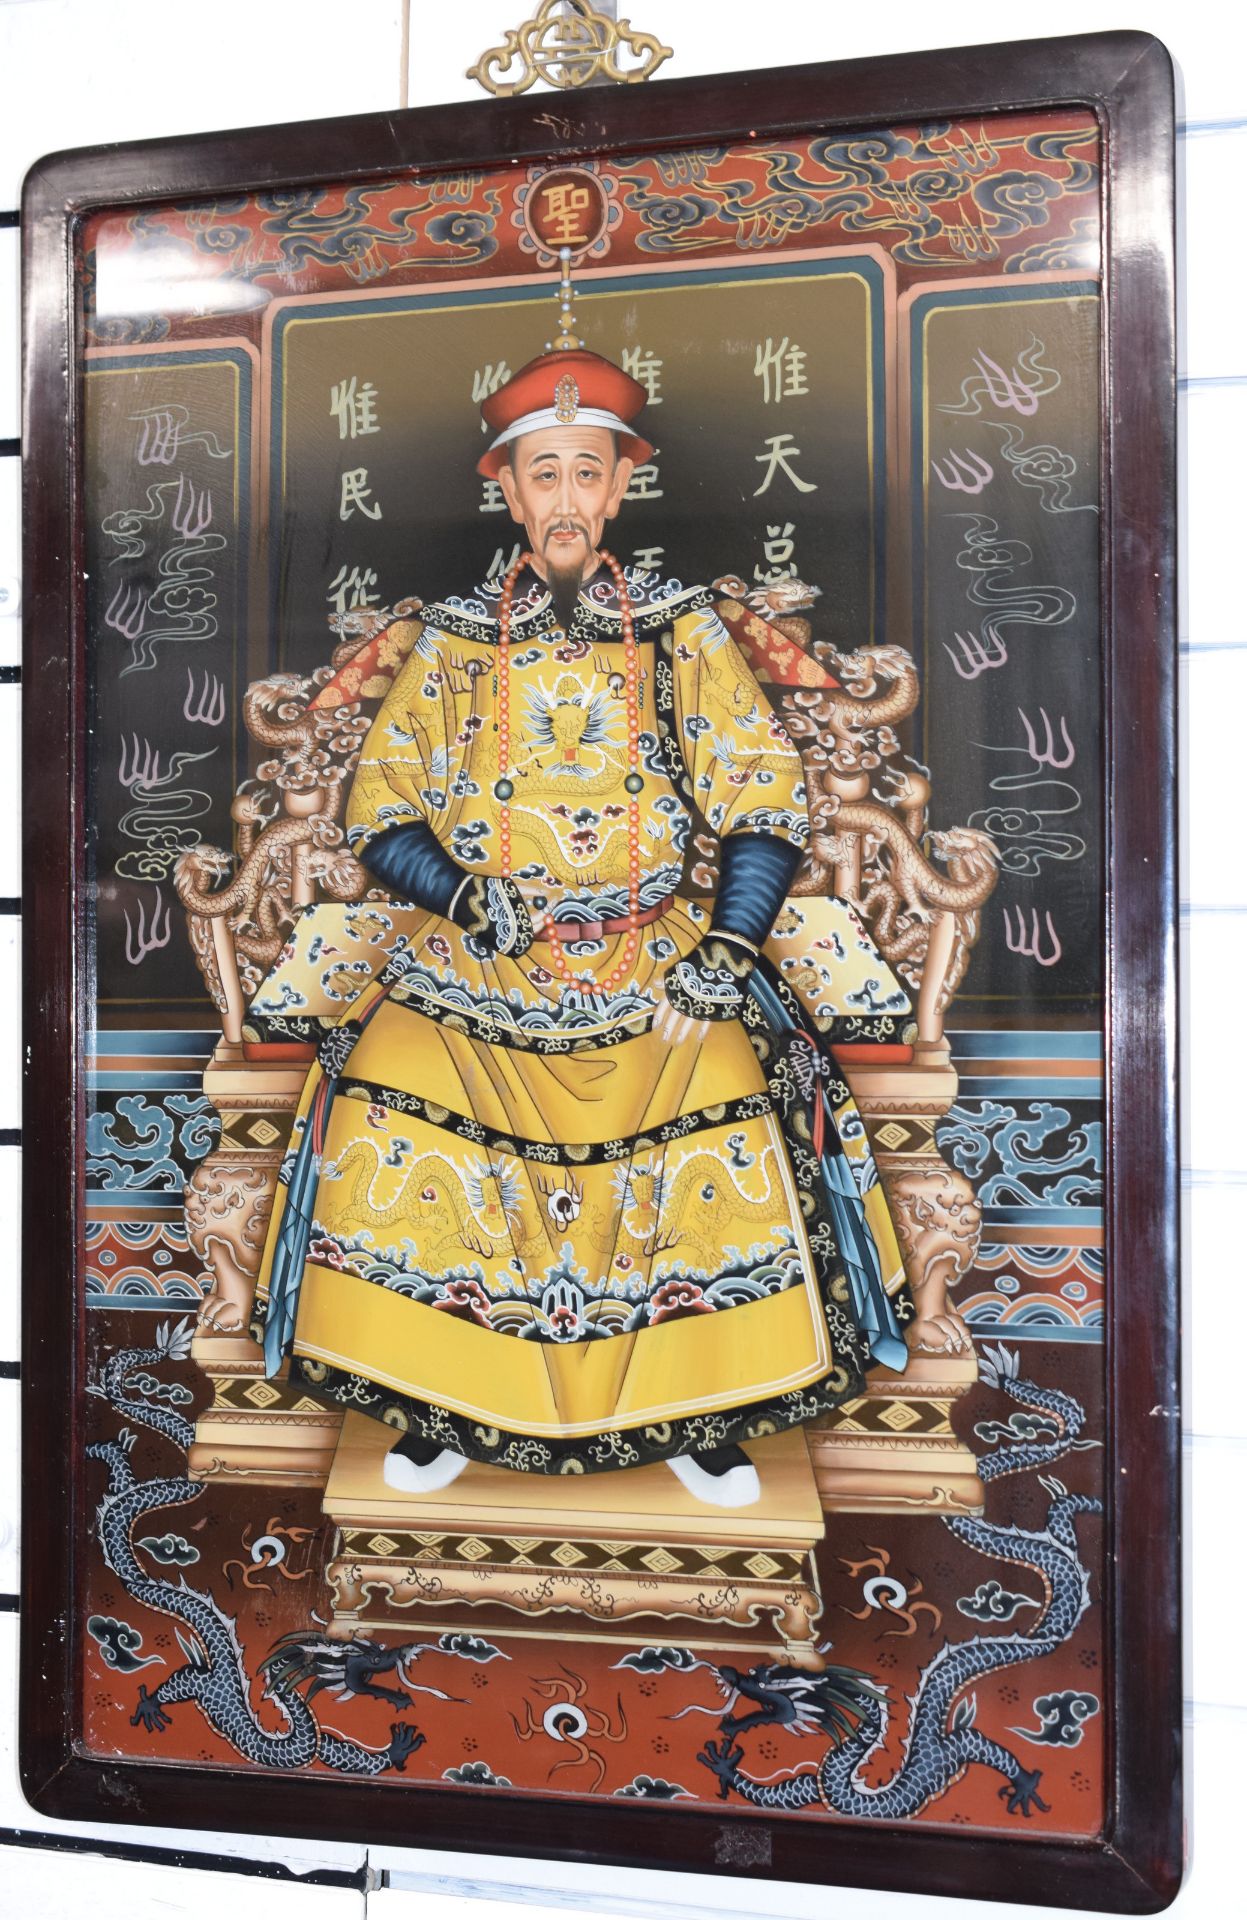 Vintage Chinese Reverse Oil On Glass Portraits Of The First Emperor & Empress Of China - Image 2 of 4